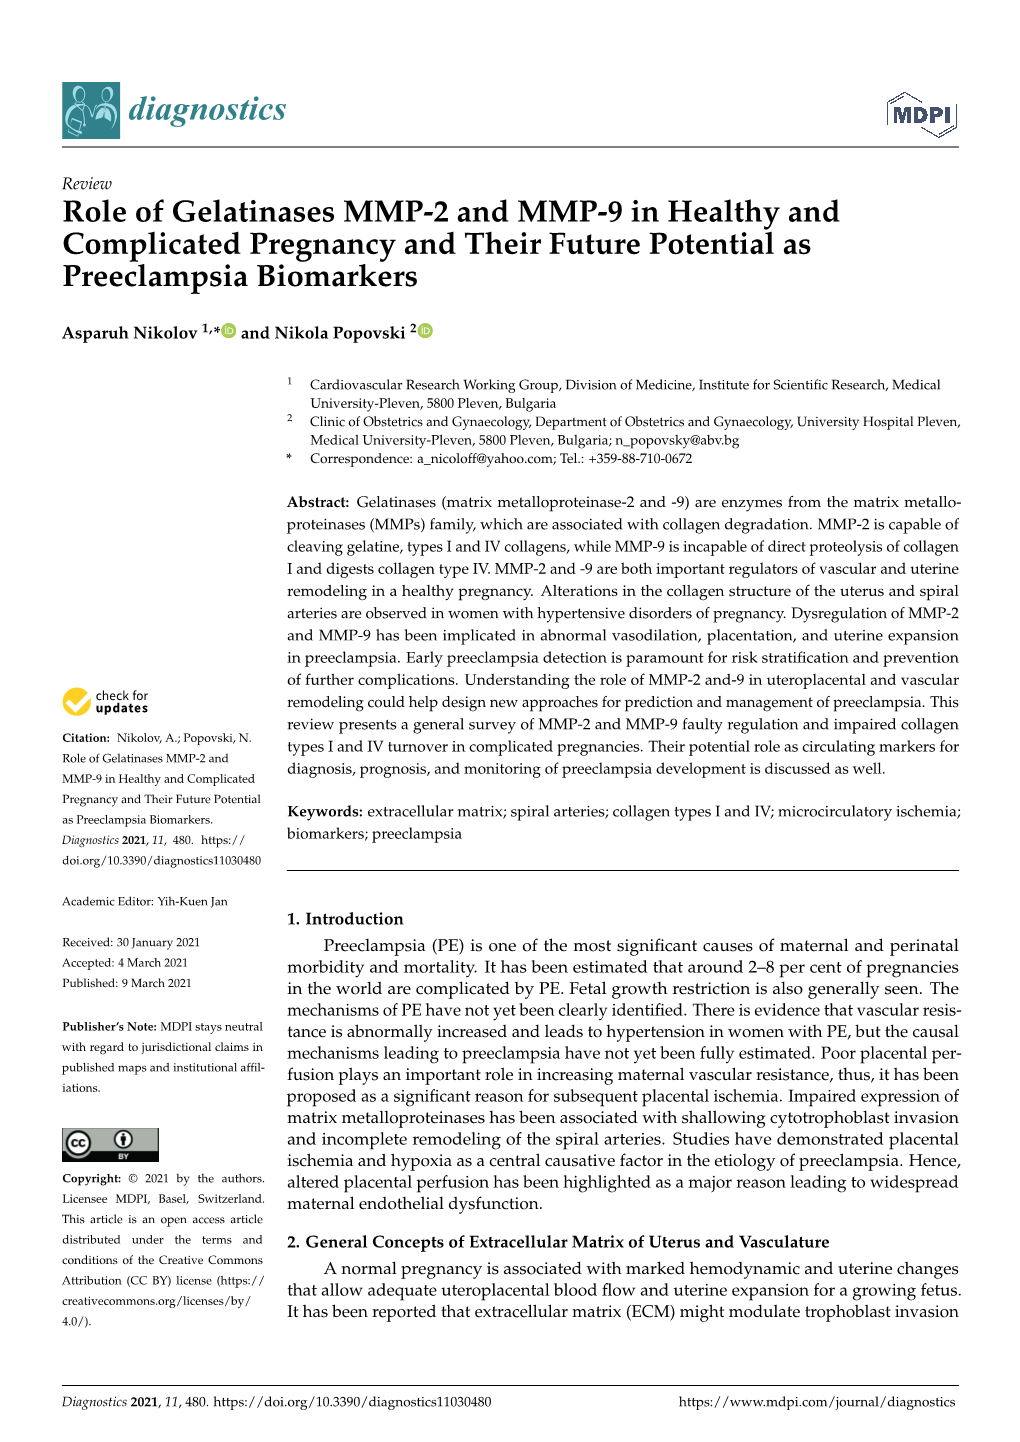 Role of Gelatinases MMP-2 and MMP-9 in Healthy and Complicated Pregnancy and Their Future Potential As Preeclampsia Biomarkers